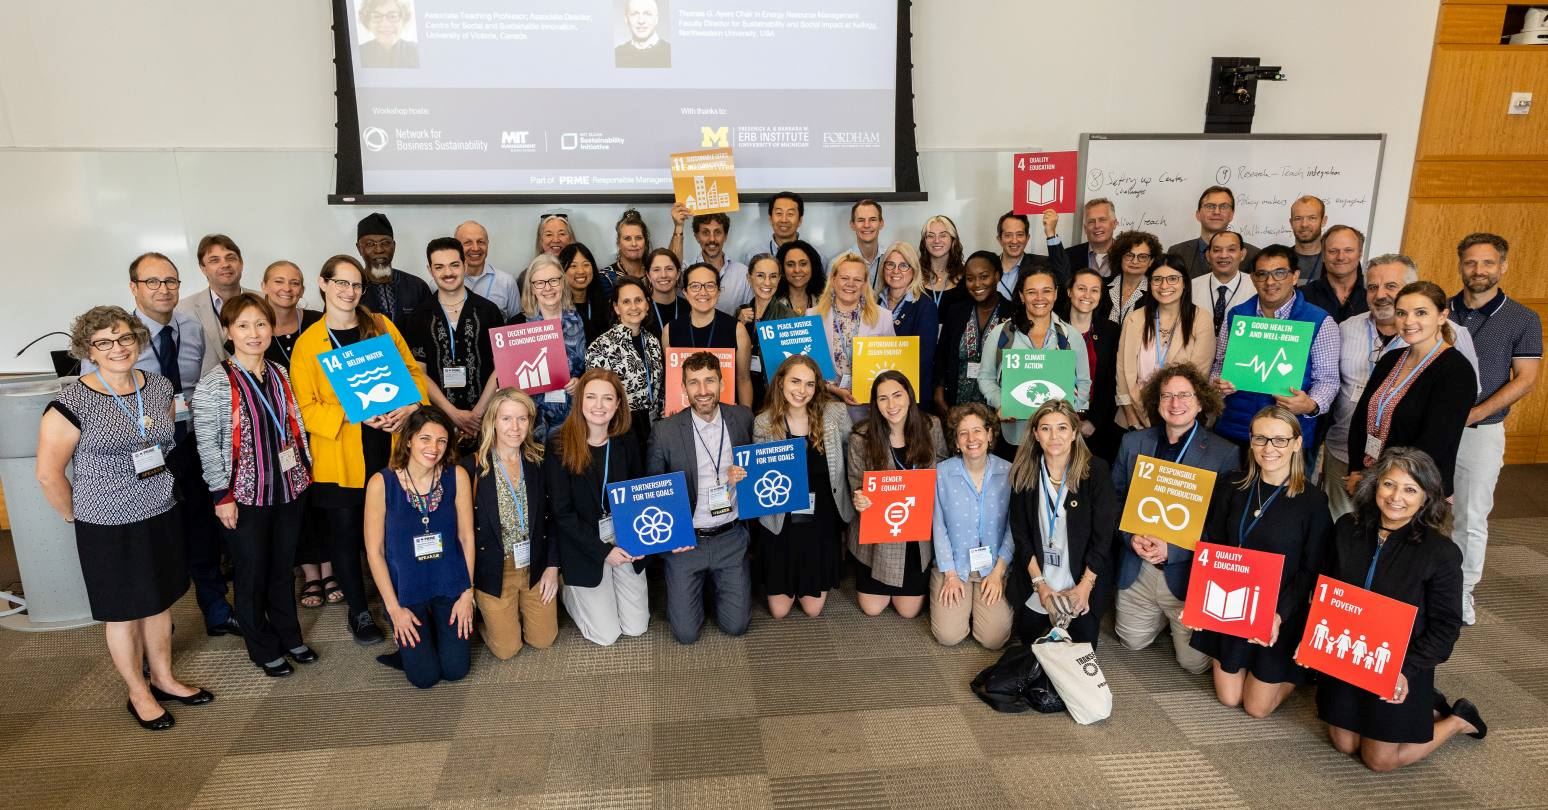 Group of people holding signs of the Sustainable Development Goals